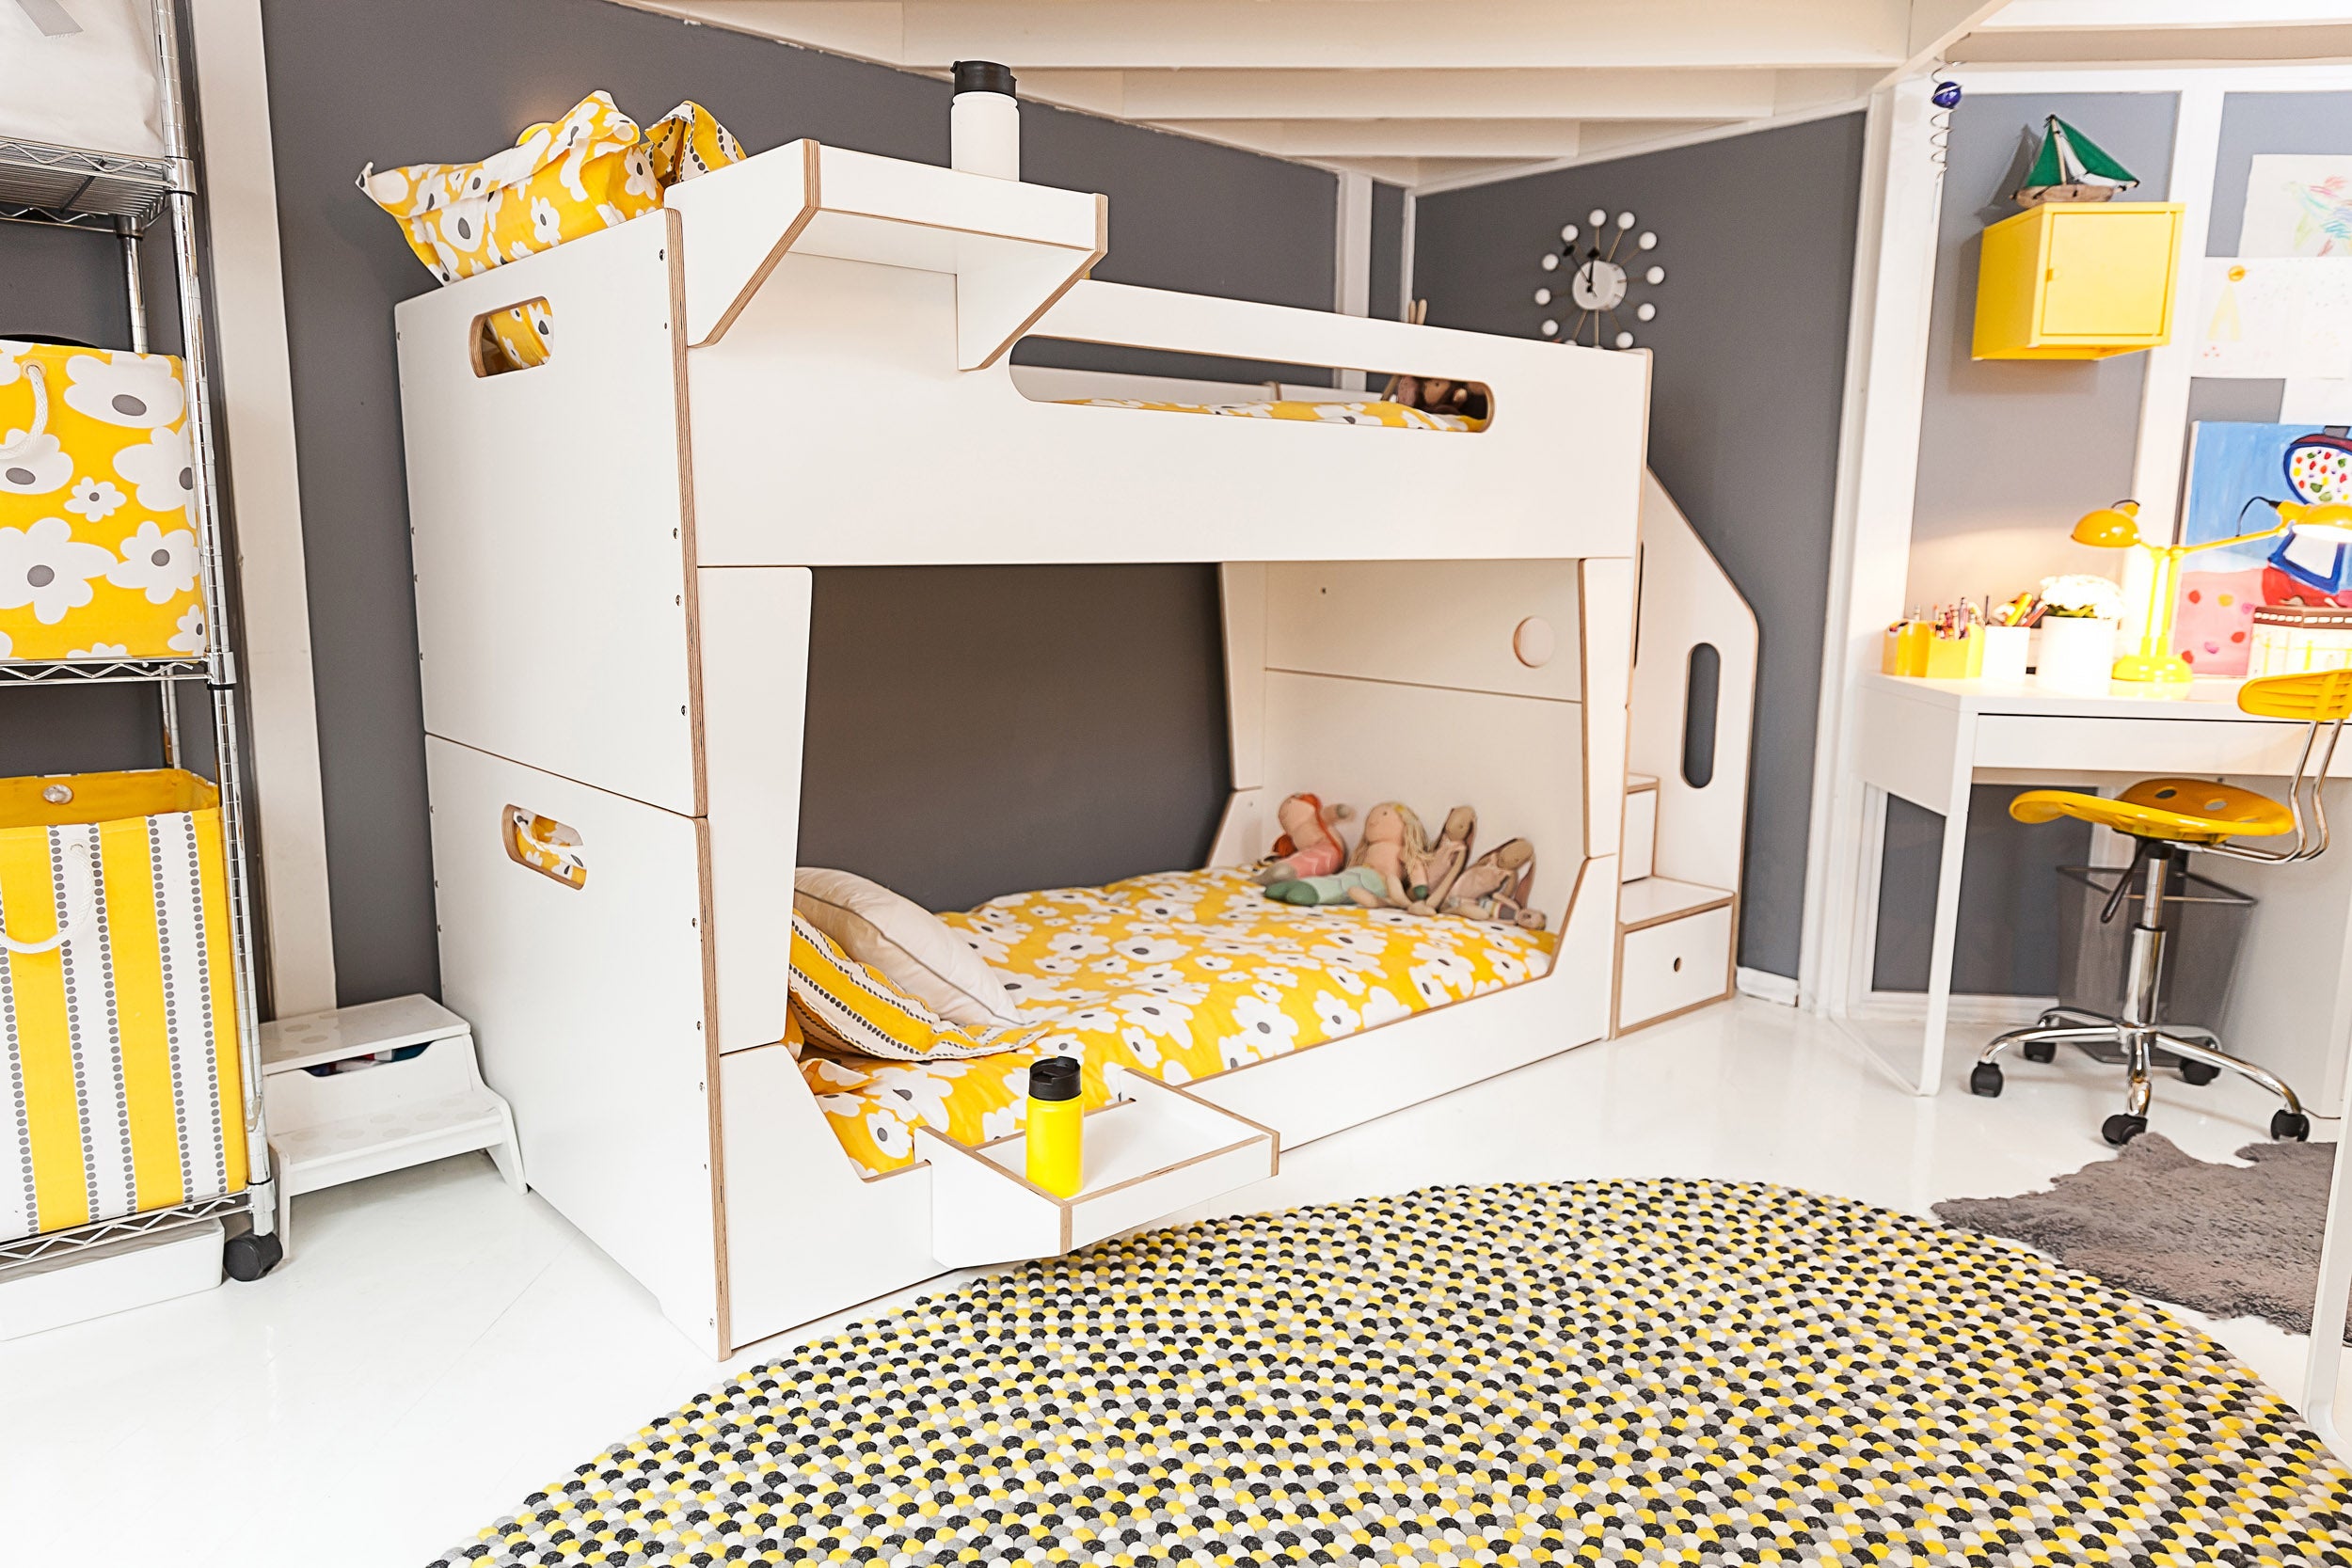 A child's room featuring a white bunk bed with yellow bedding, surrounded by colorful shelves and a circular rug.